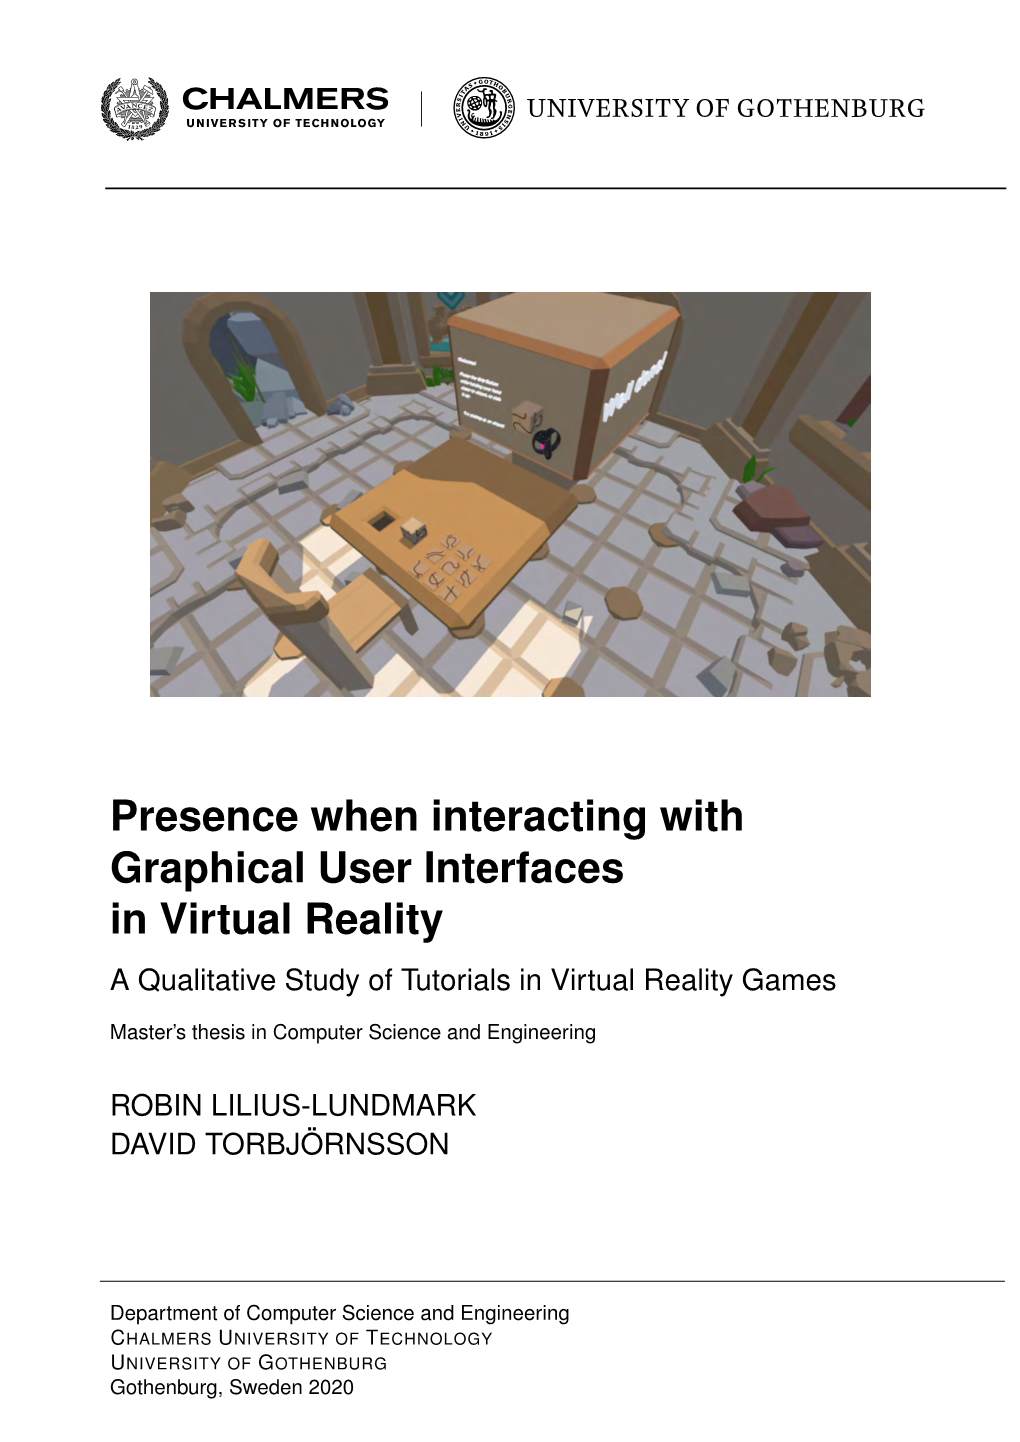 Presence When Interacting with Graphical User Interfaces in Virtual Reality a Qualitative Study of Tutorials in Virtual Reality Games